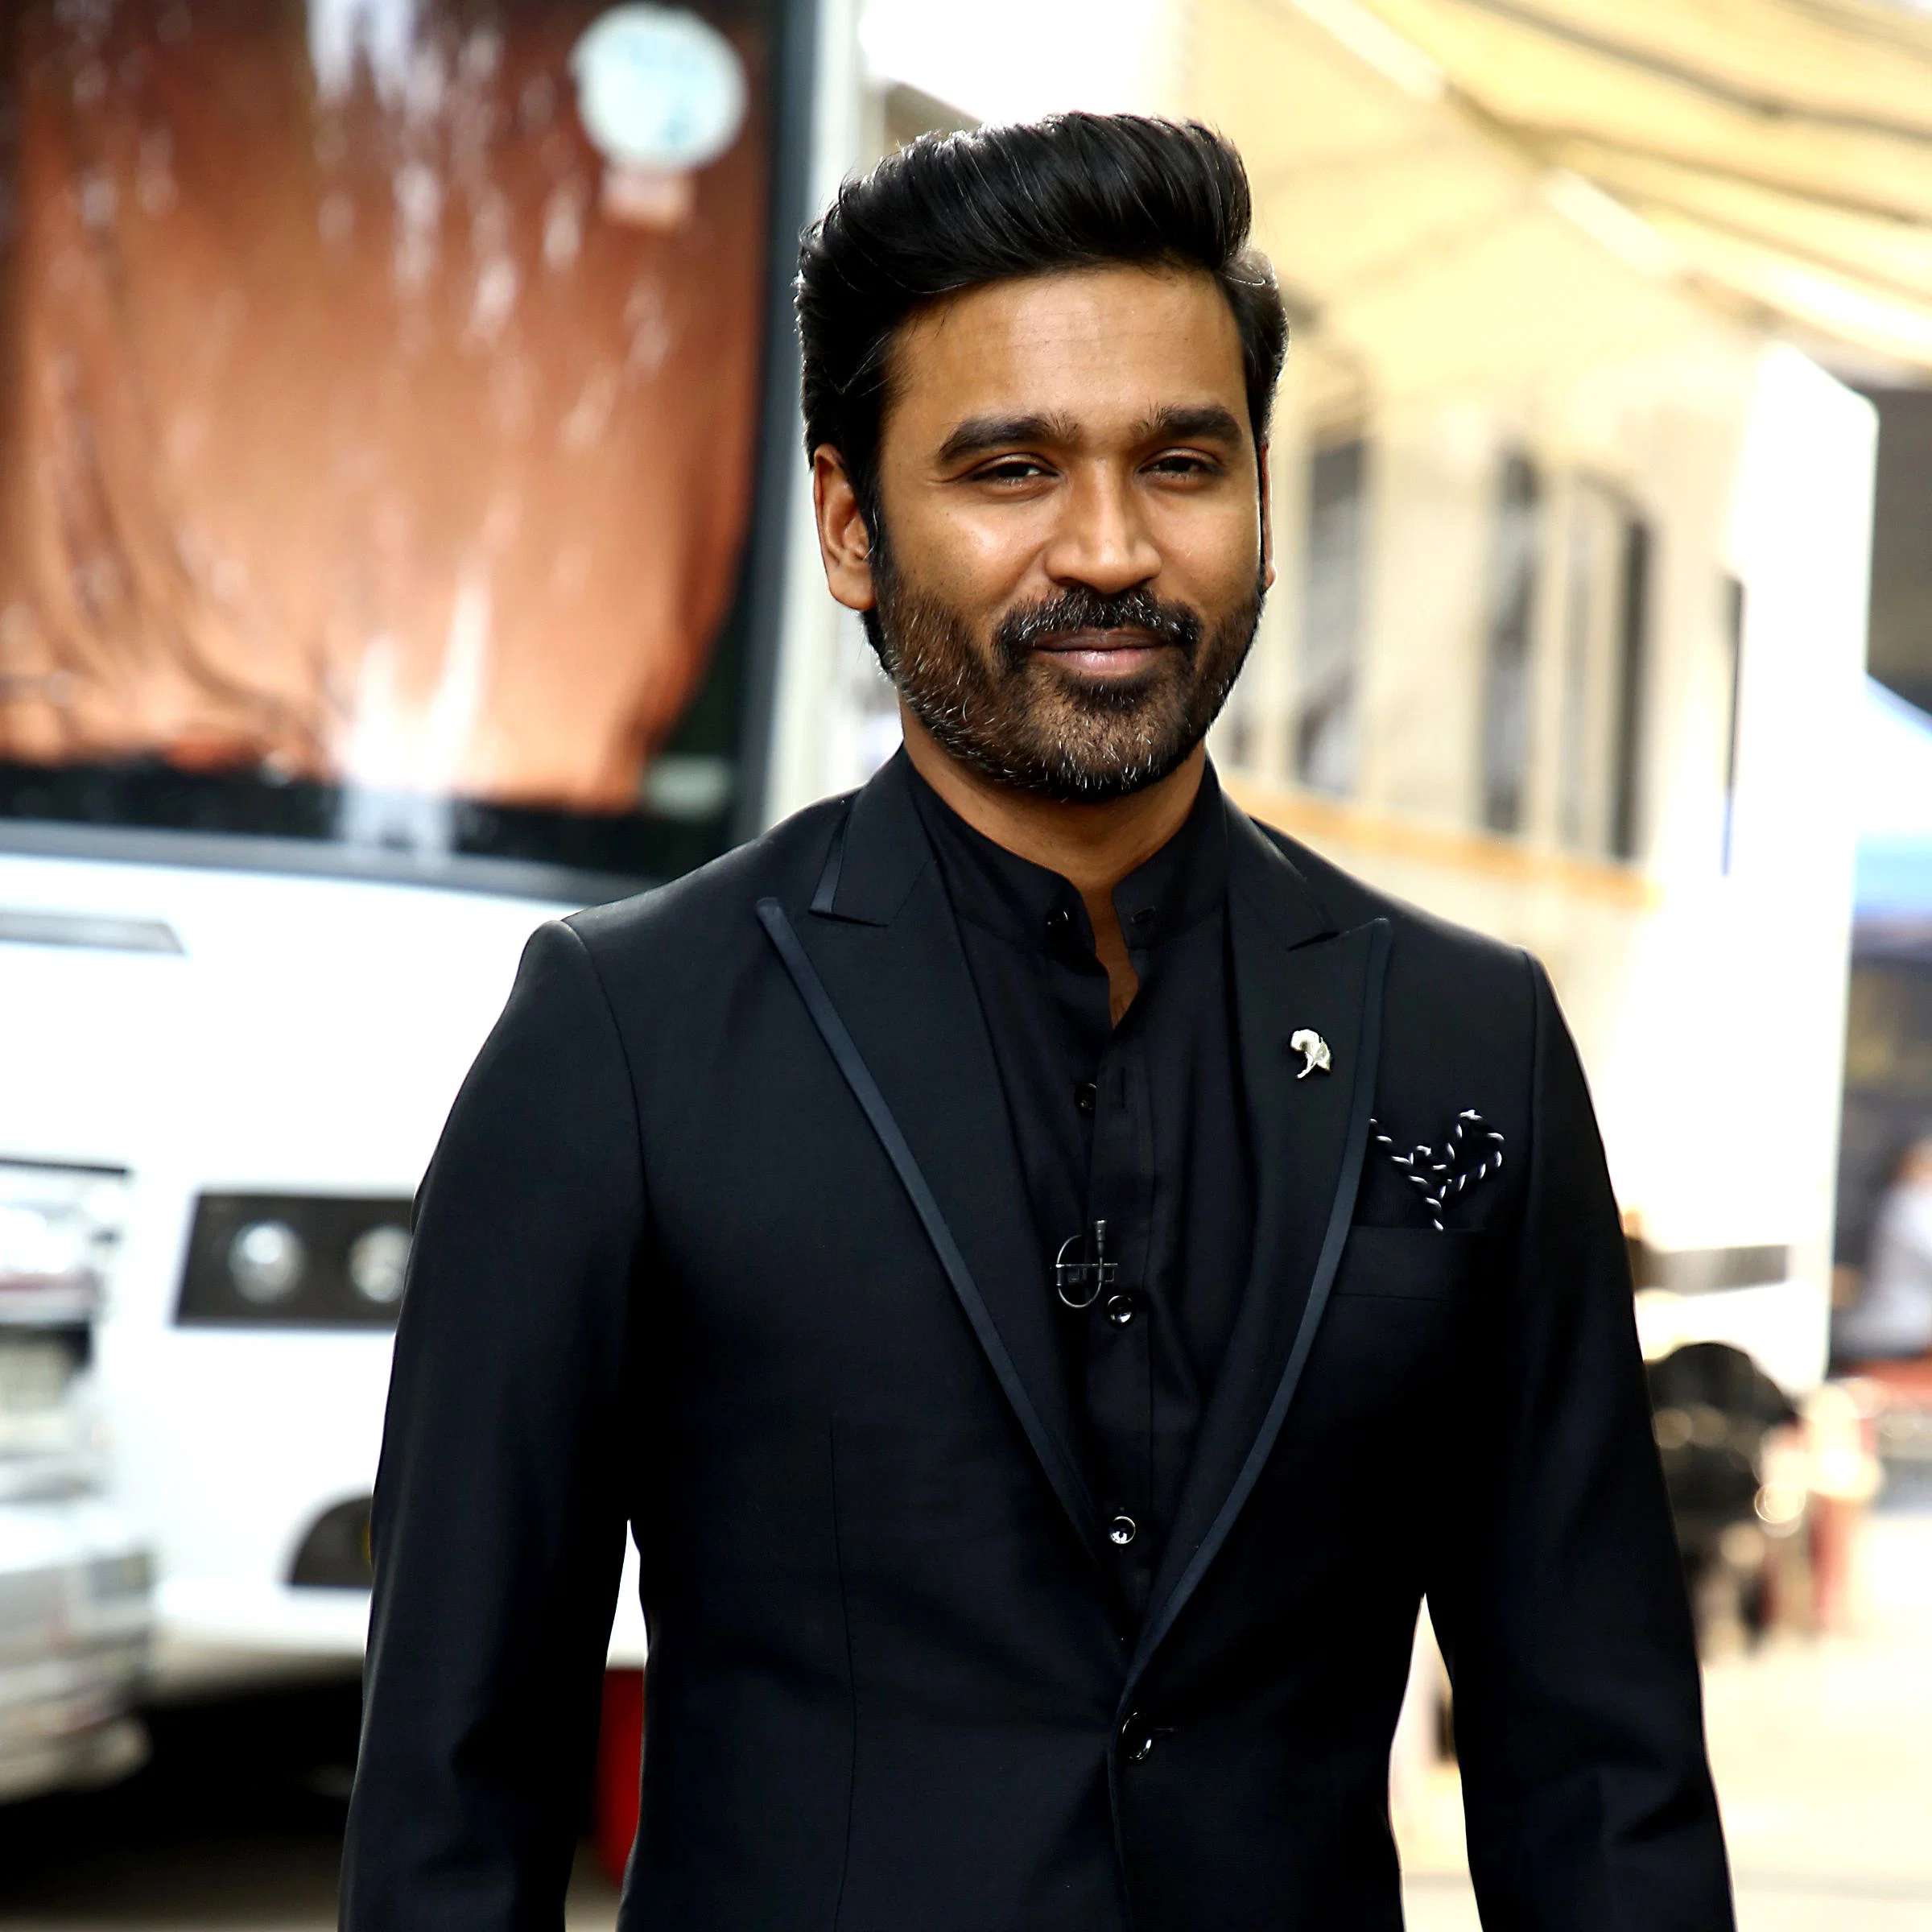 Dhanush completes his acting for 2 decades